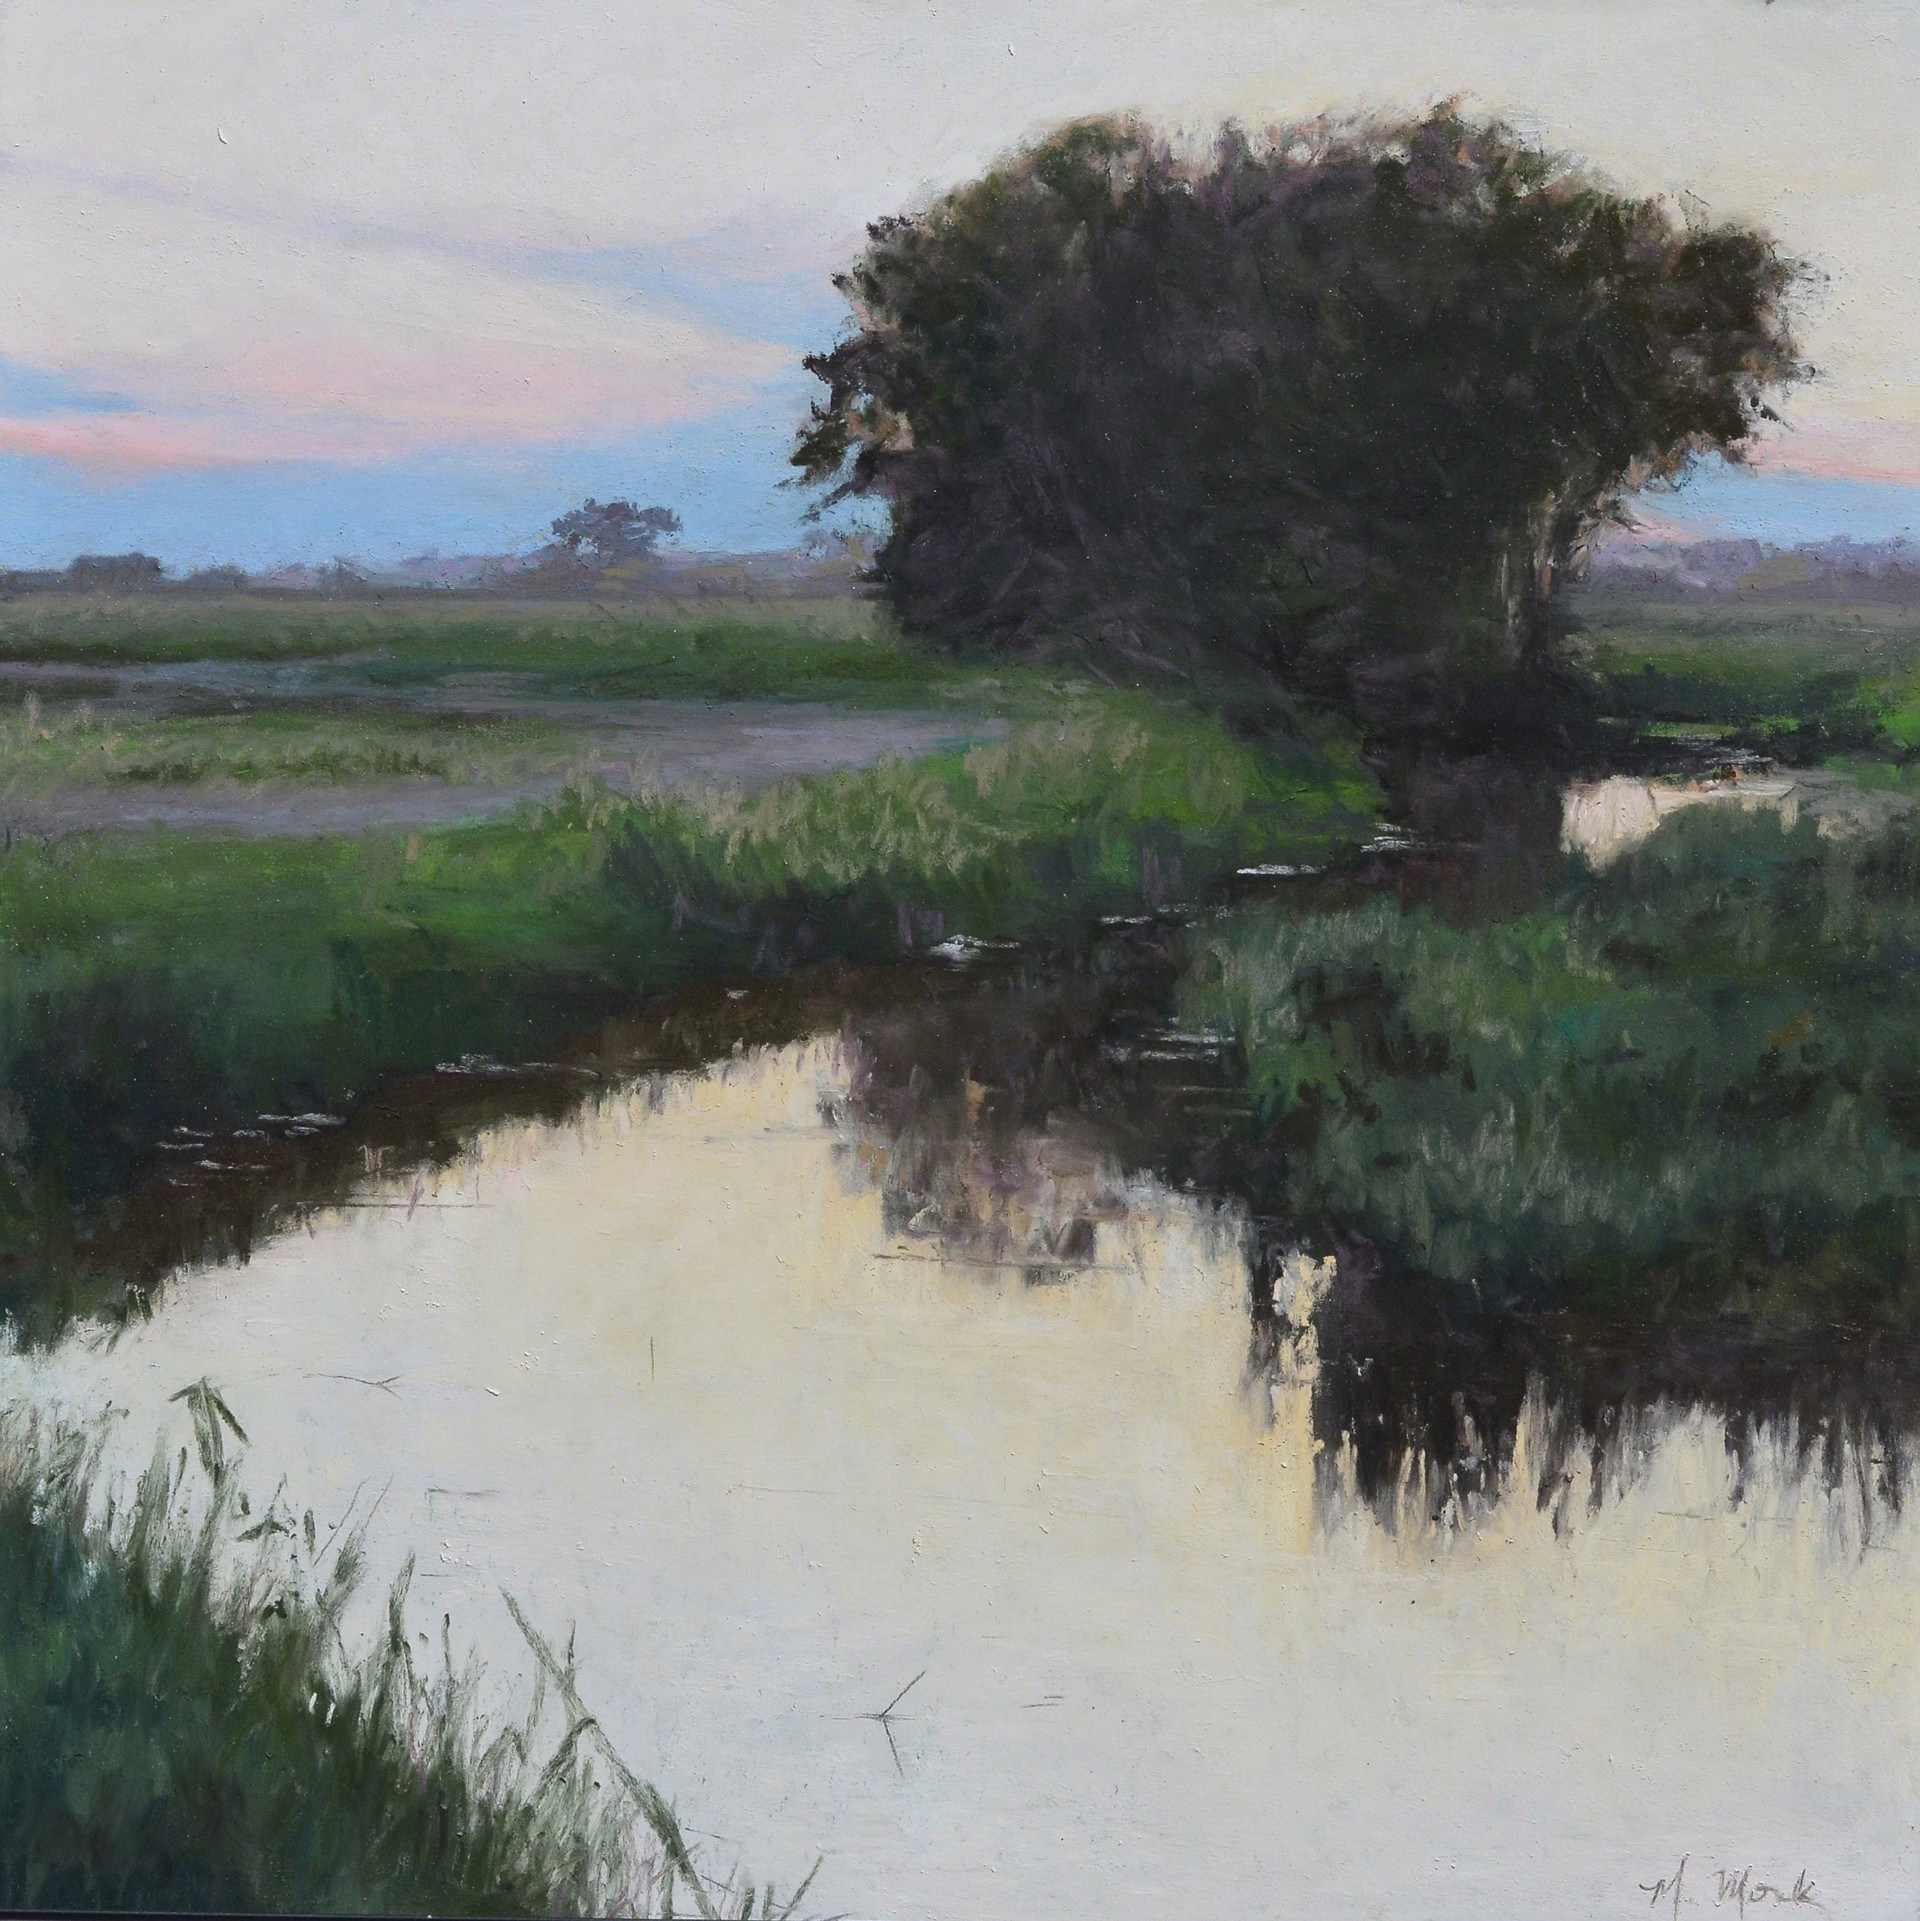 Dusk on Country Road by Mary Monk